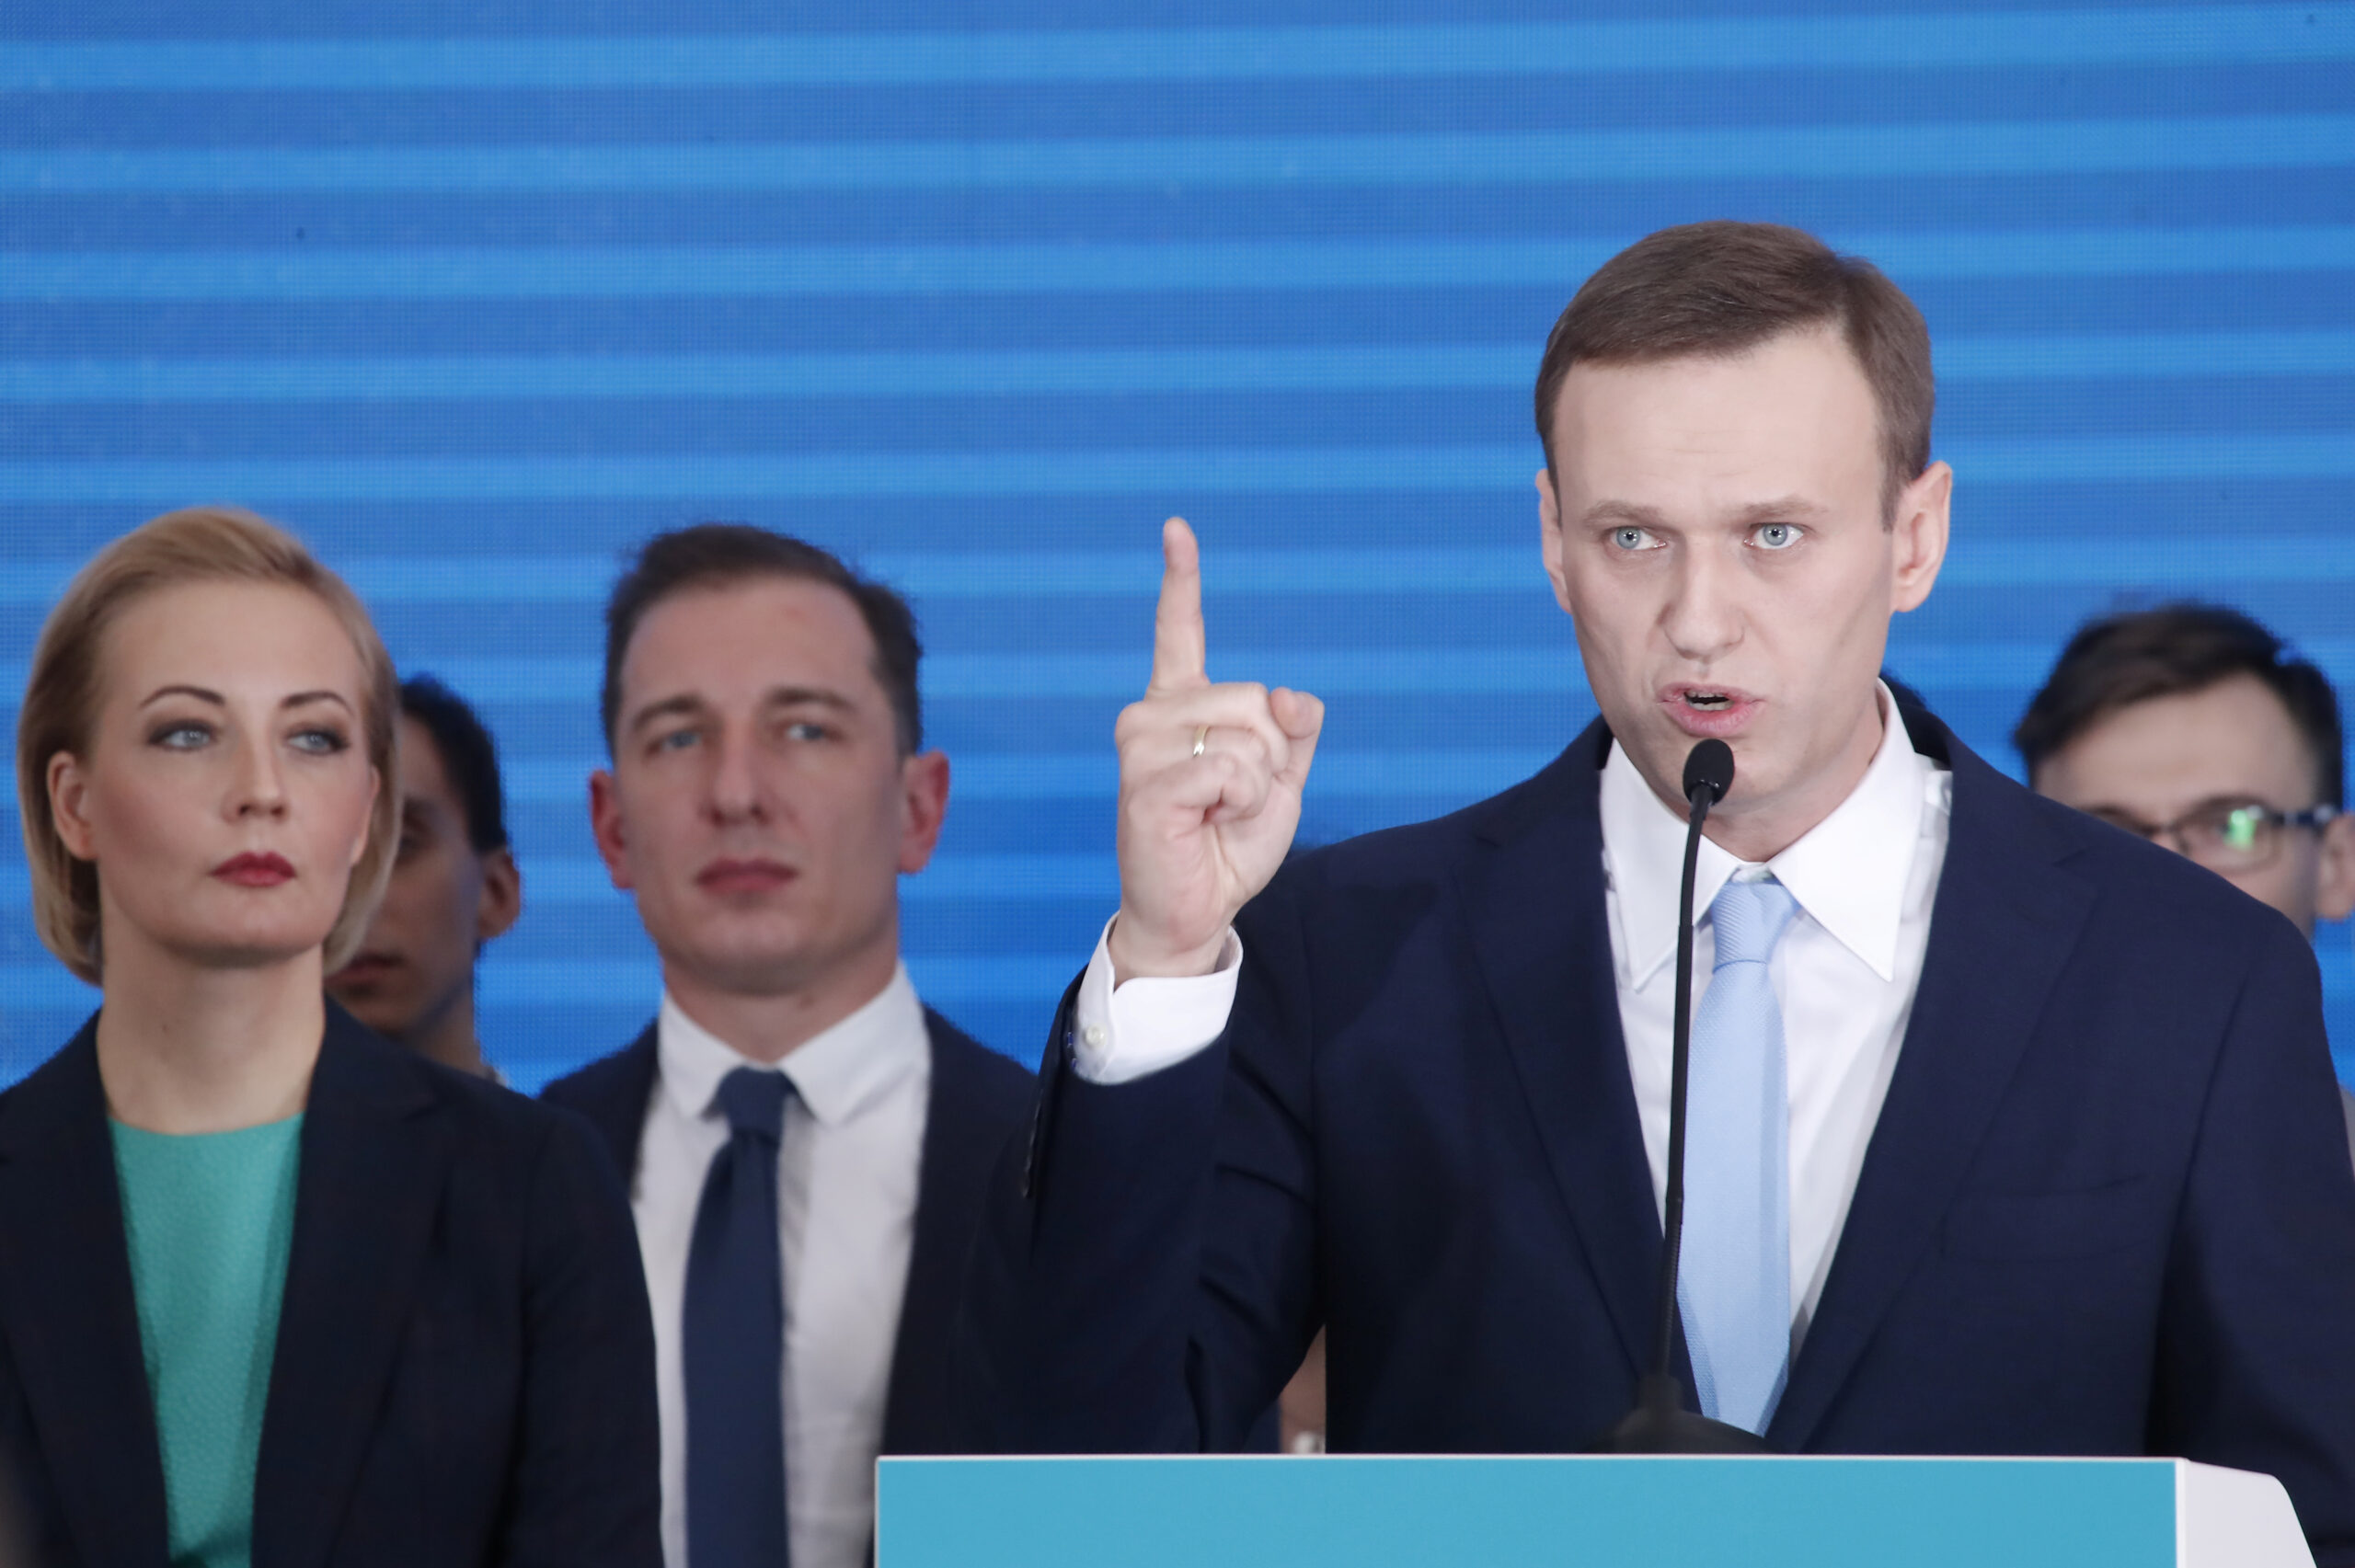 Alexey Navalny a prominent Russian opposition figure, died unexpectedly in prison on February 16, 2024, at the age of 47. Navalny was serving a three-and-a-half